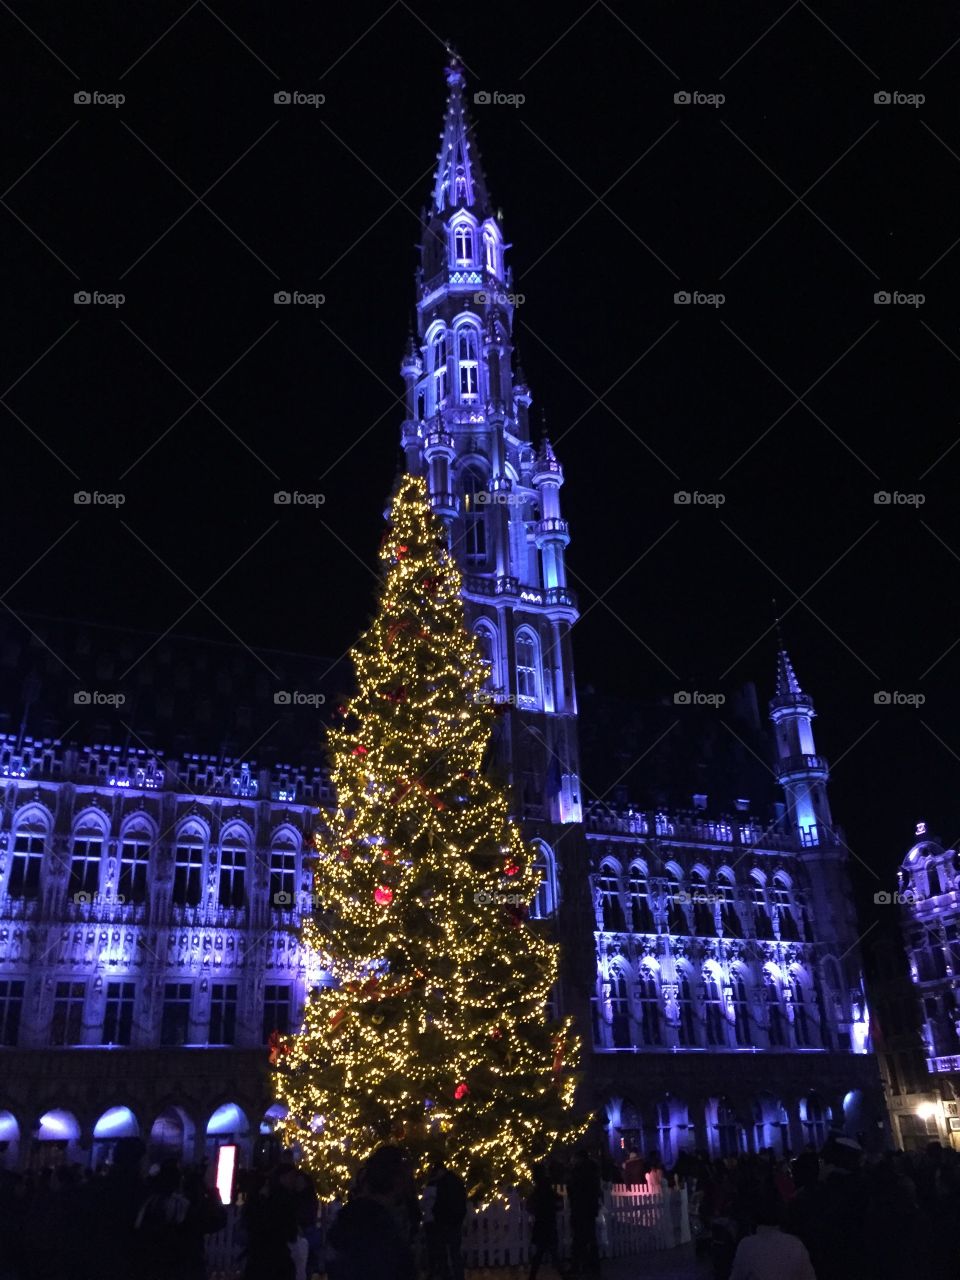 Brussels, Belgium Grand Place Christmas 2016 tree at night.